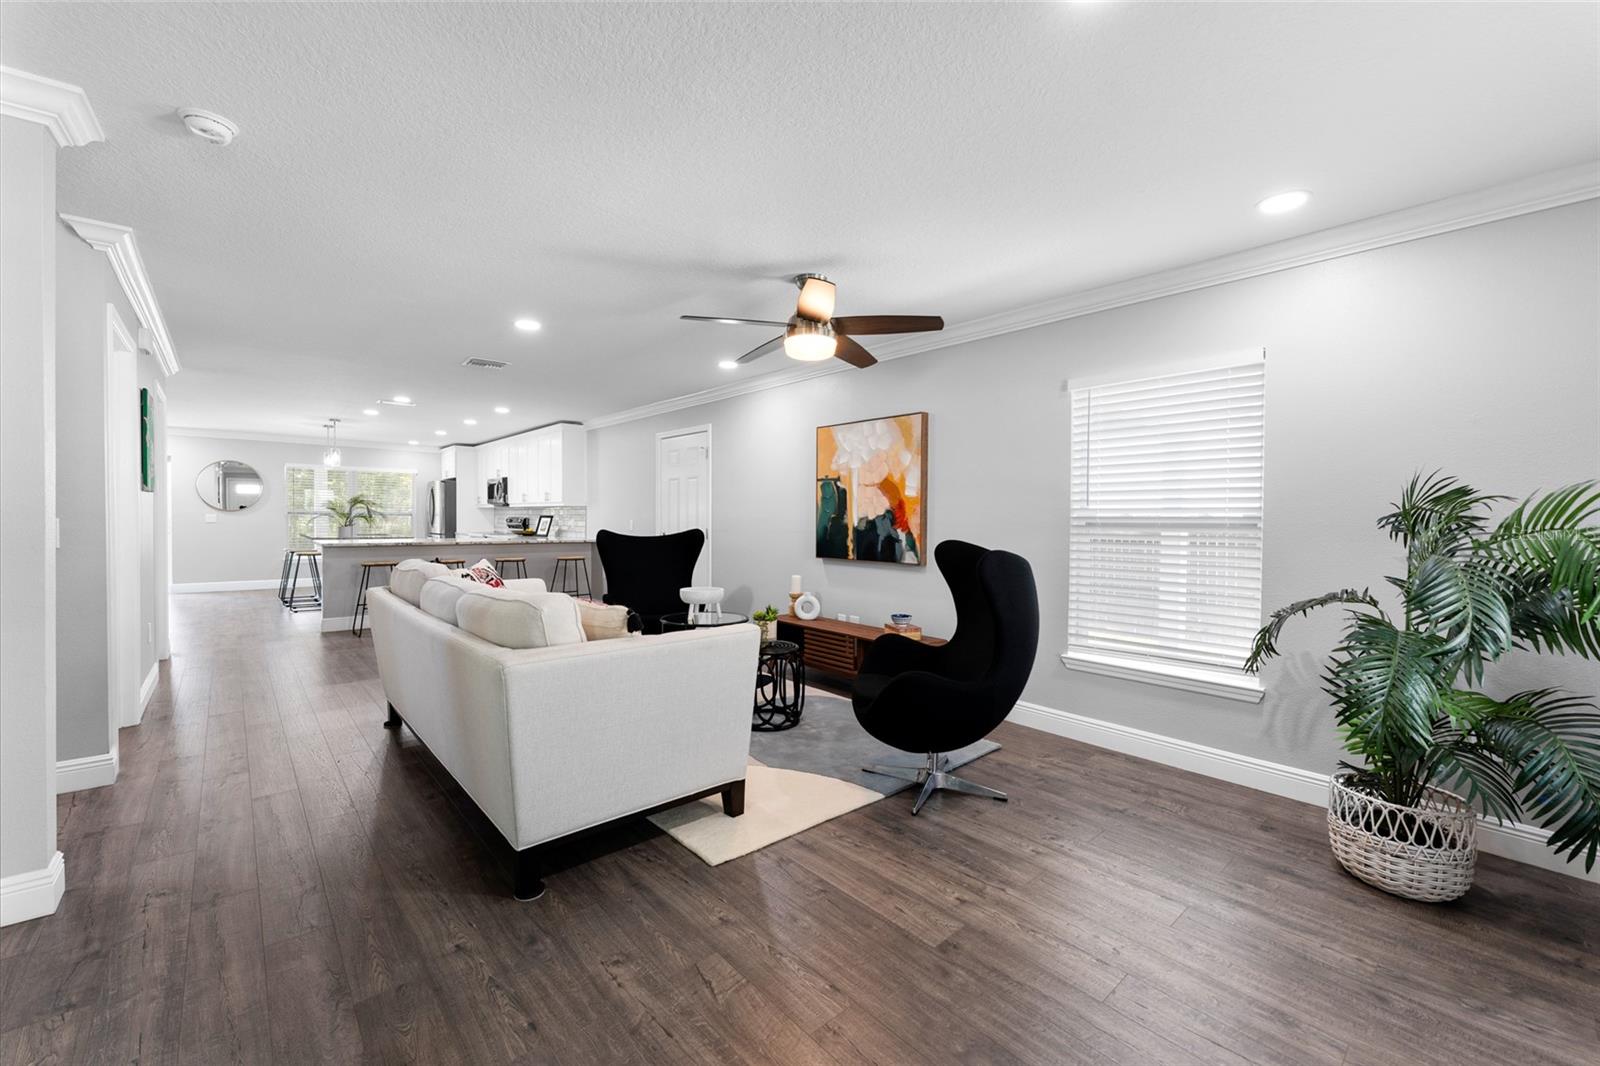 High ceilings, gorgeous flooring and room to entertain!